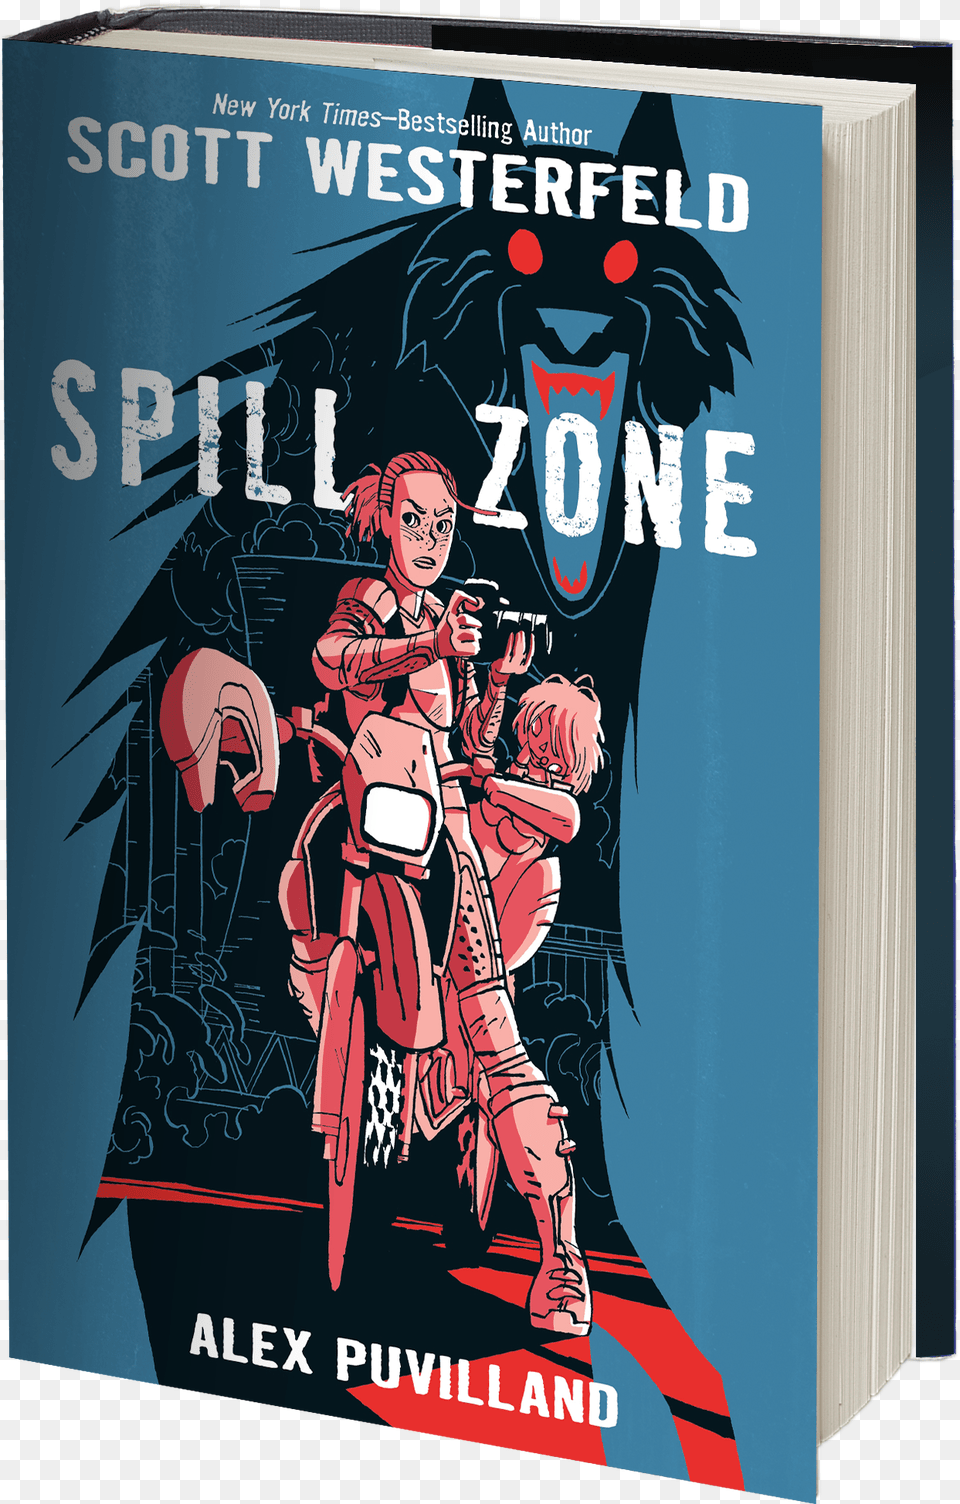 Three Years Ago An Event Destroyed The Small City Of Spill Zone By Scott Westerfield, Book, Comics, Publication, Adult Png